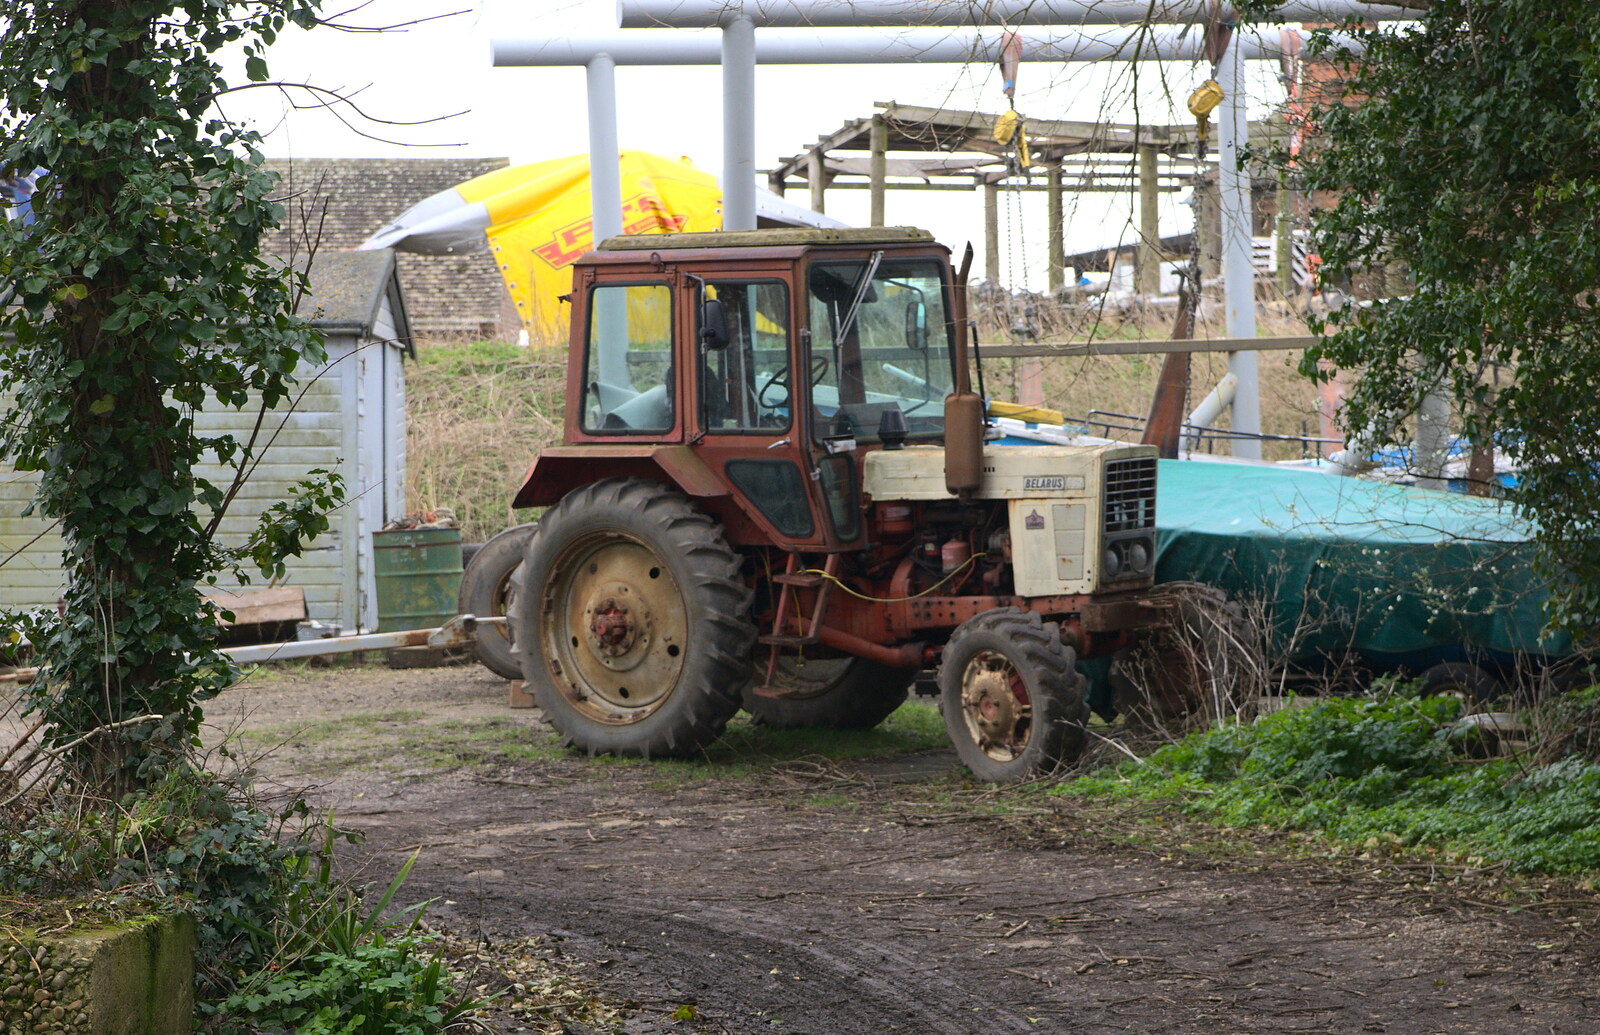 An old Belarus tractor from A Trip to Orford Castle, Orford, Suffolk - 2nd March 2014